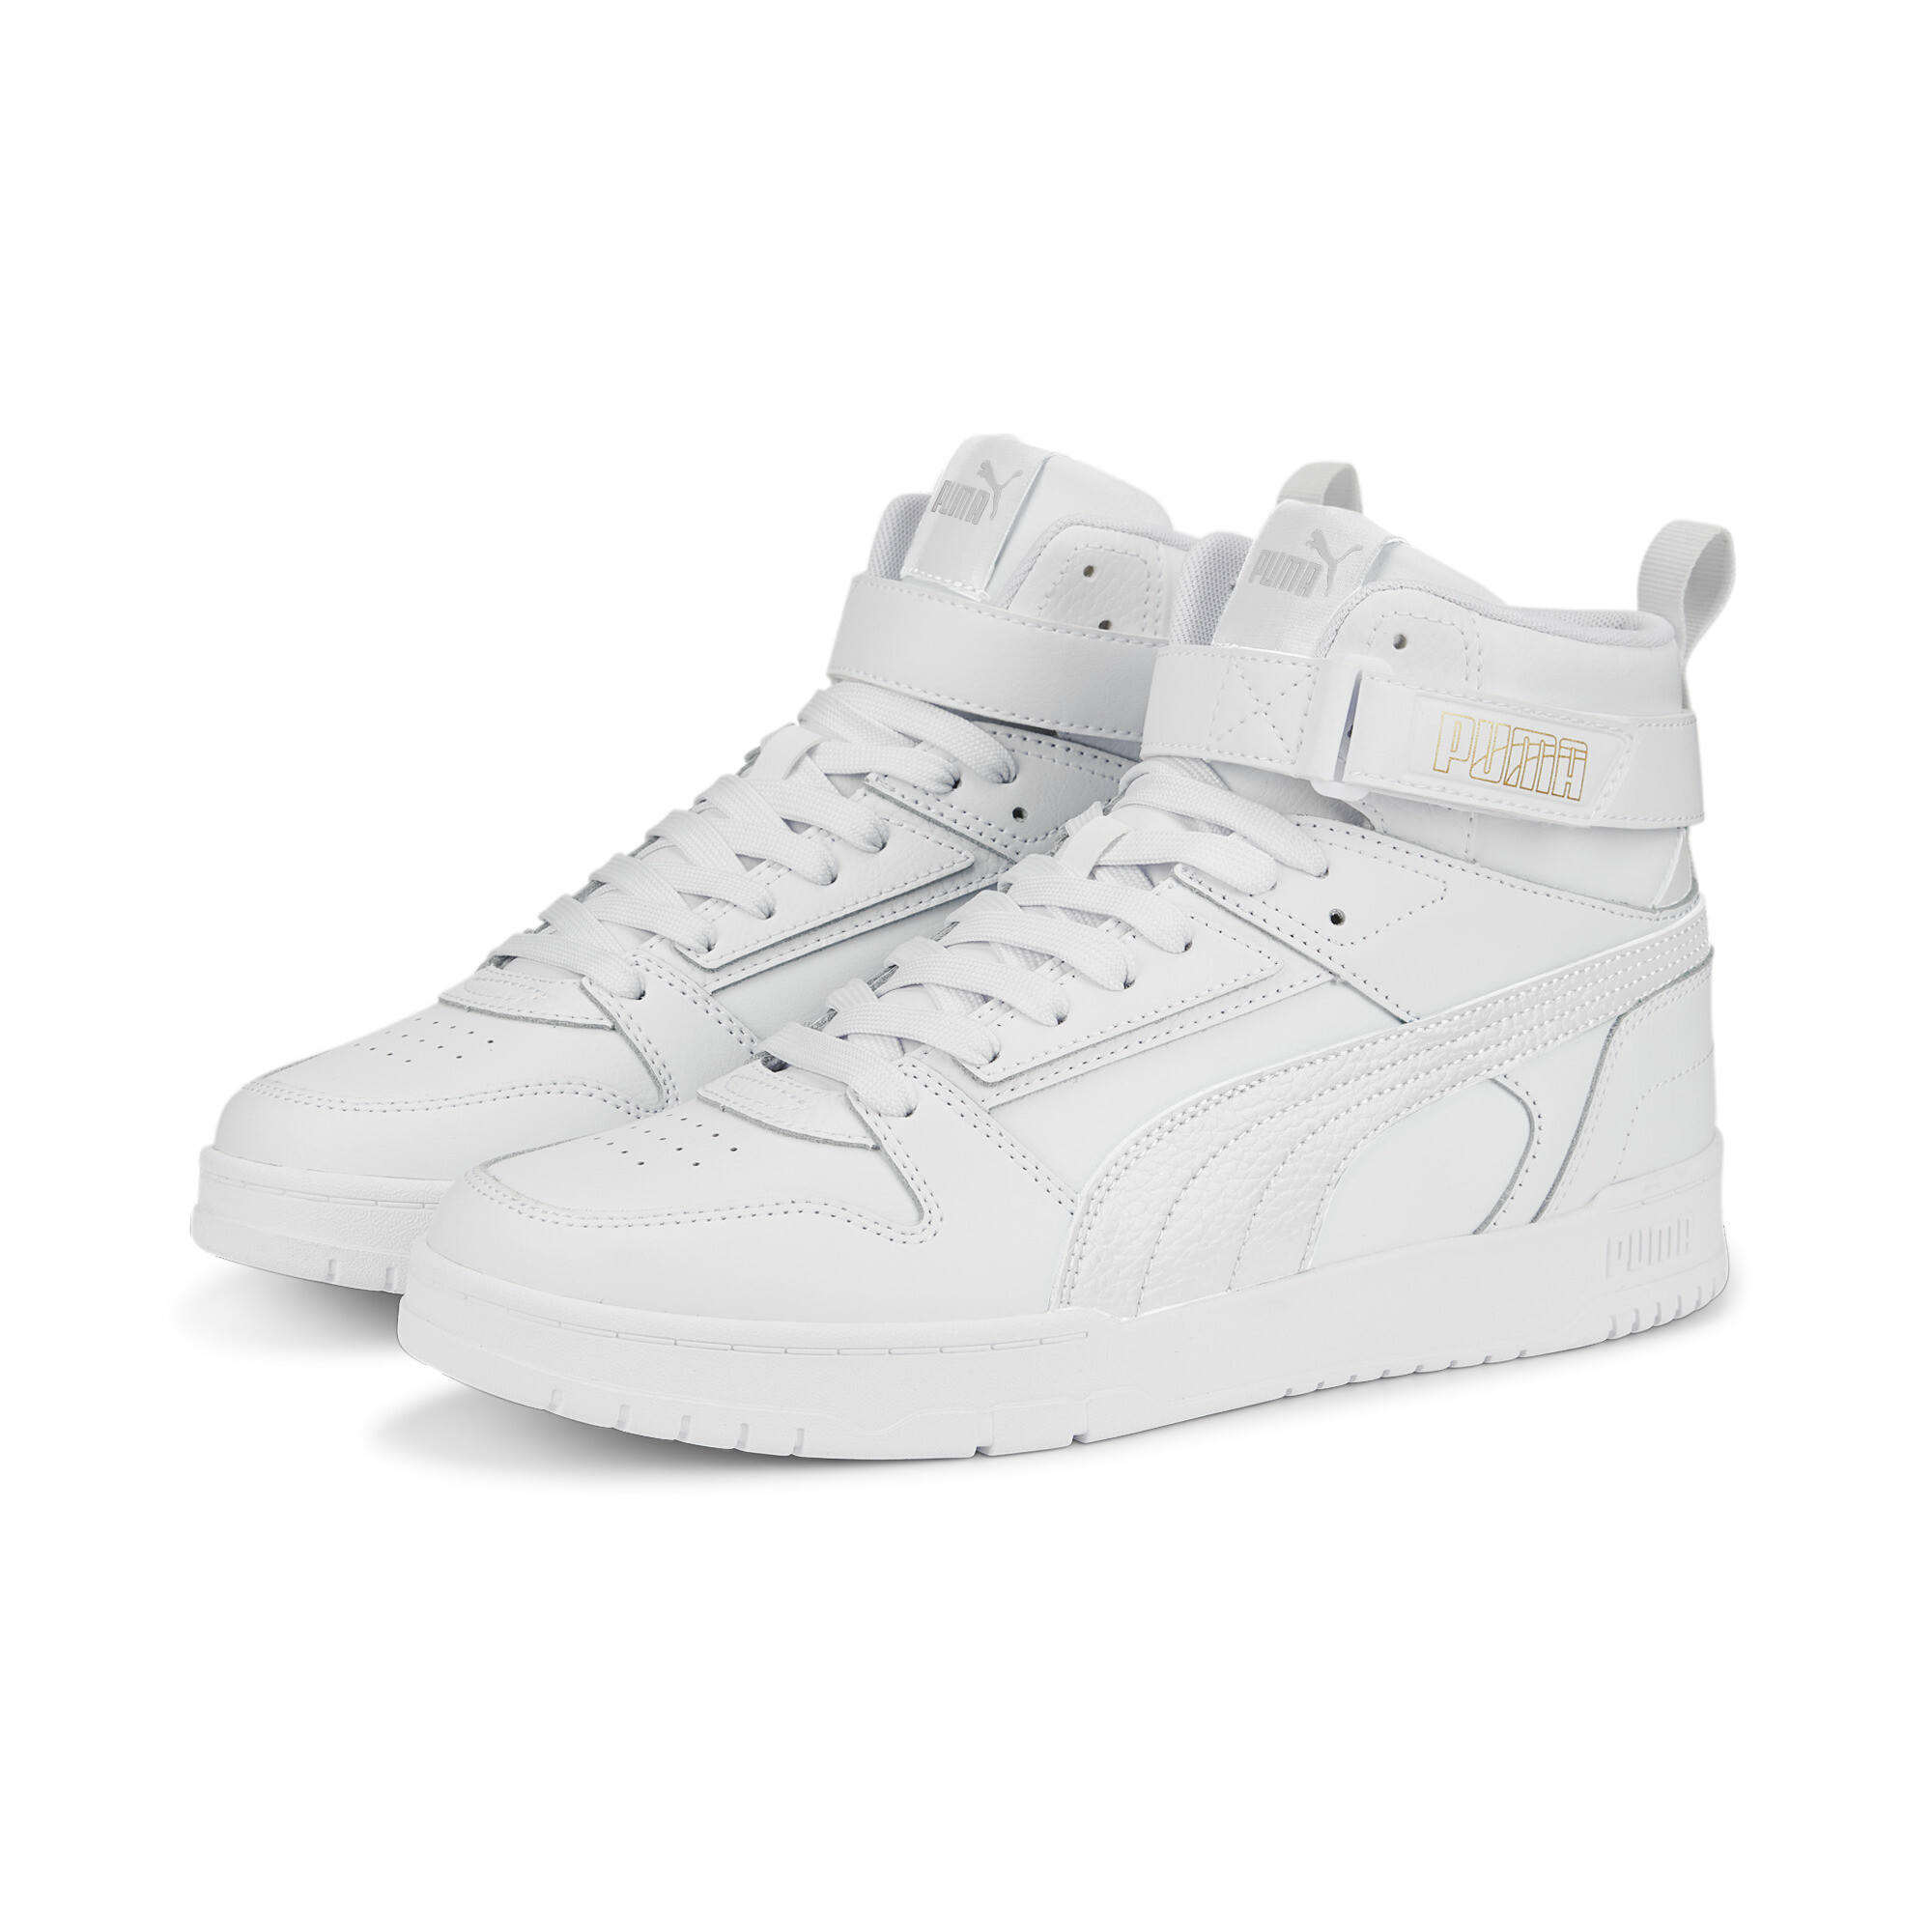 Puma RBD Game sneakers wit Synthetisch - Maat 39